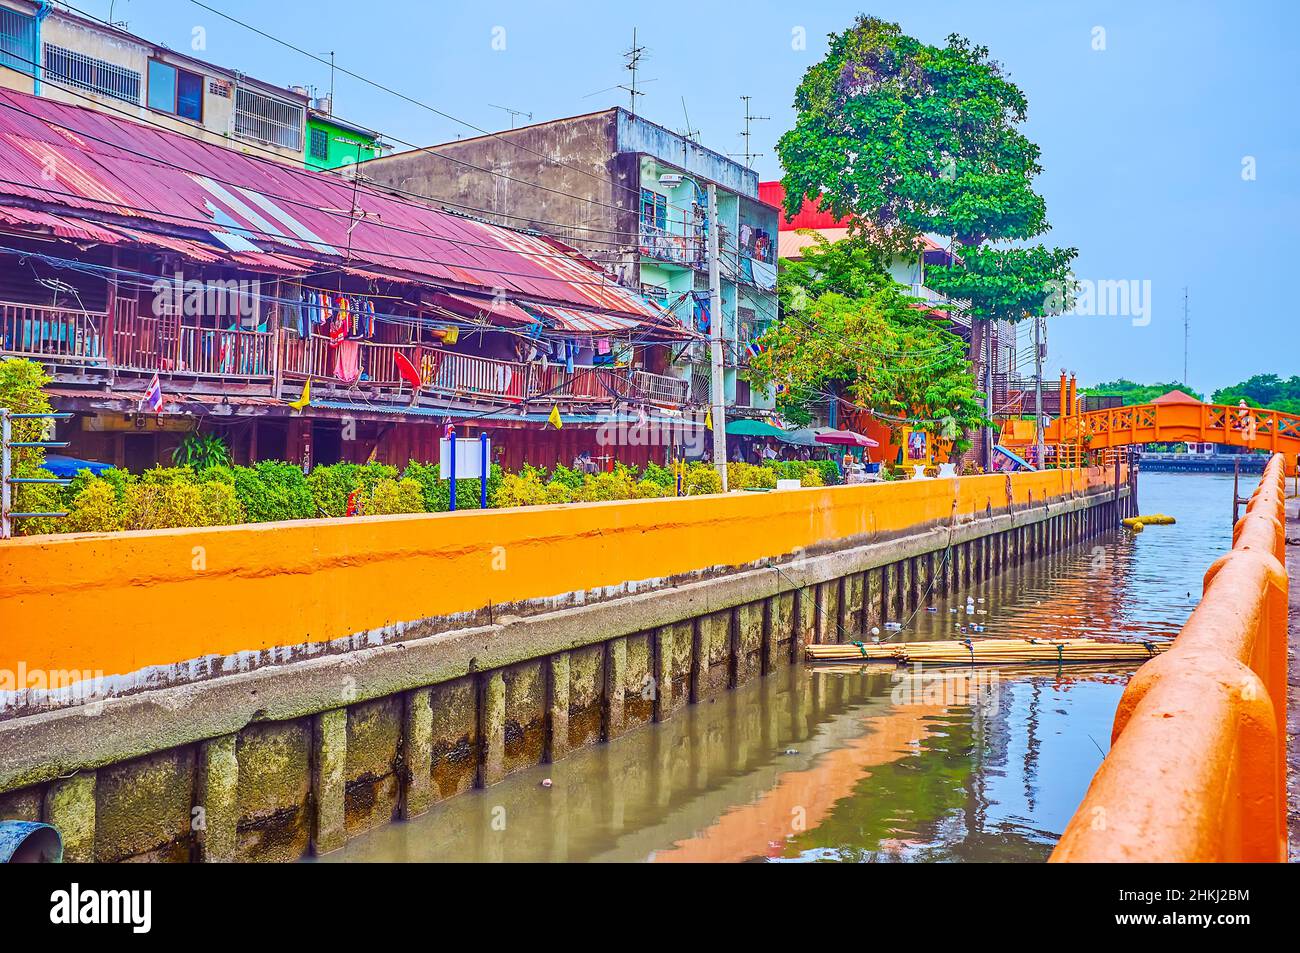 The shabby houses in  residential district and narrow canal with a orange bridge, Bangkok, Thailand Stock Photo